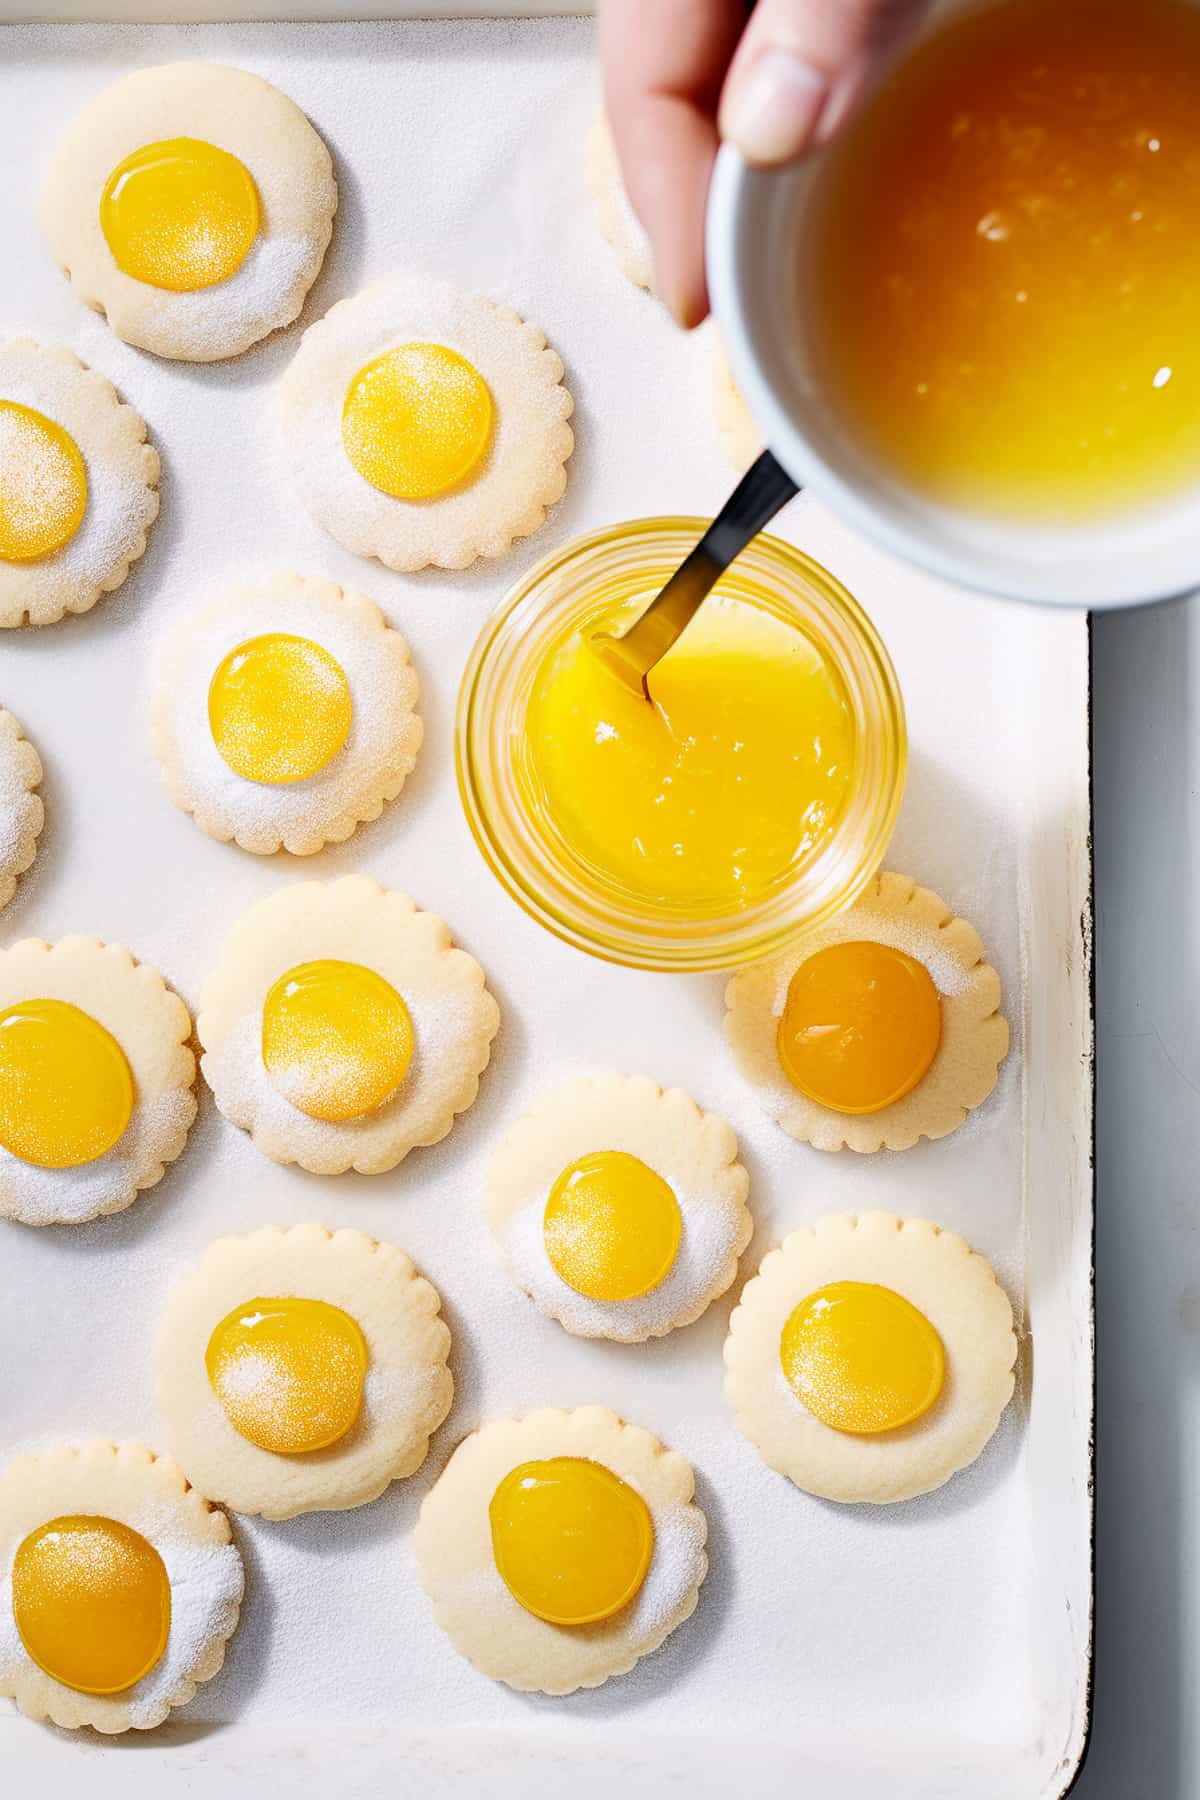 Filling thumbprint cookie with lemon curd.